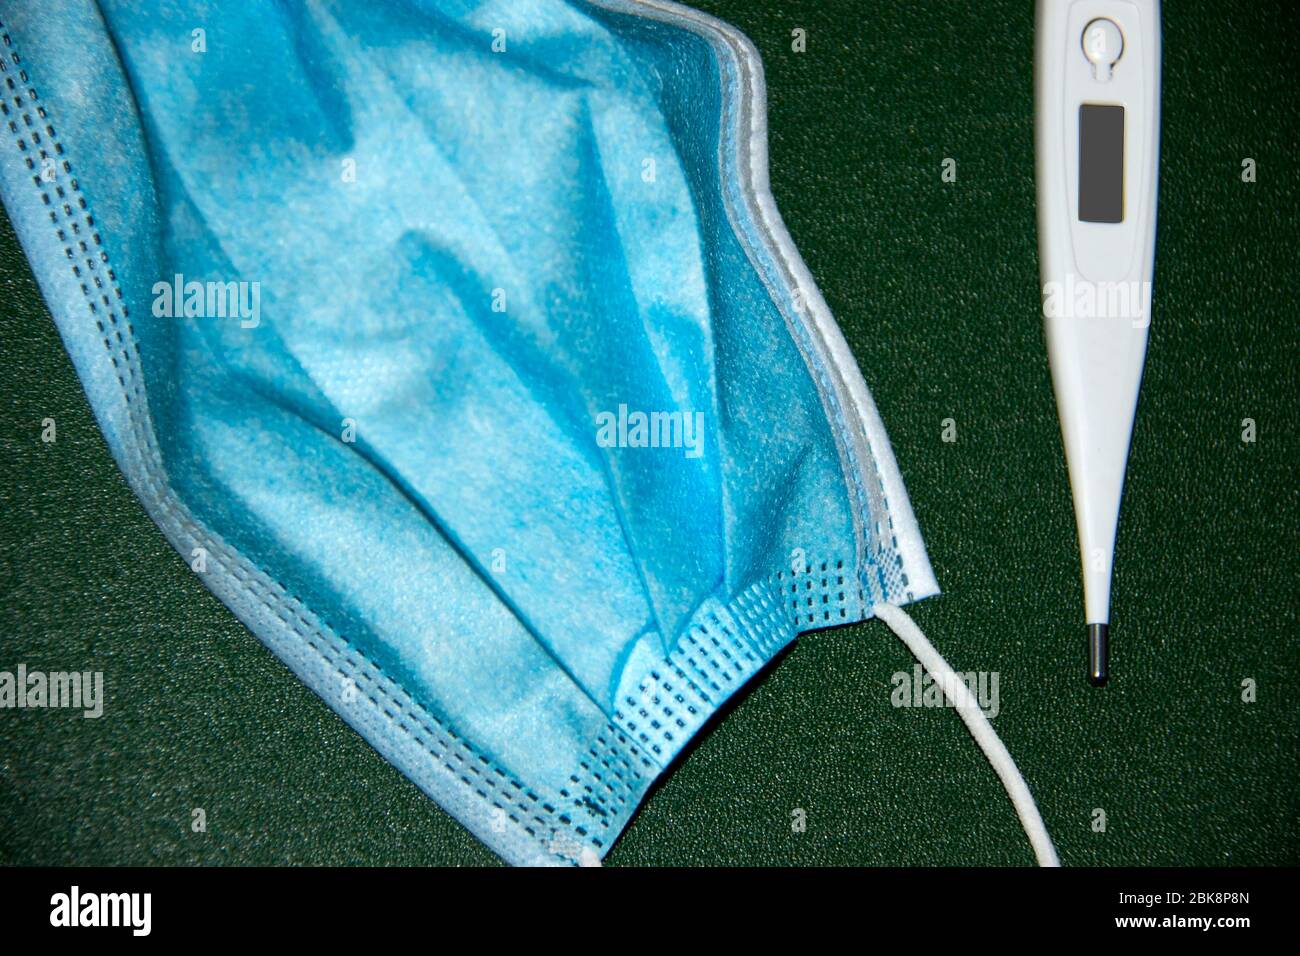 Medical face mask and thermometer Stock Photo